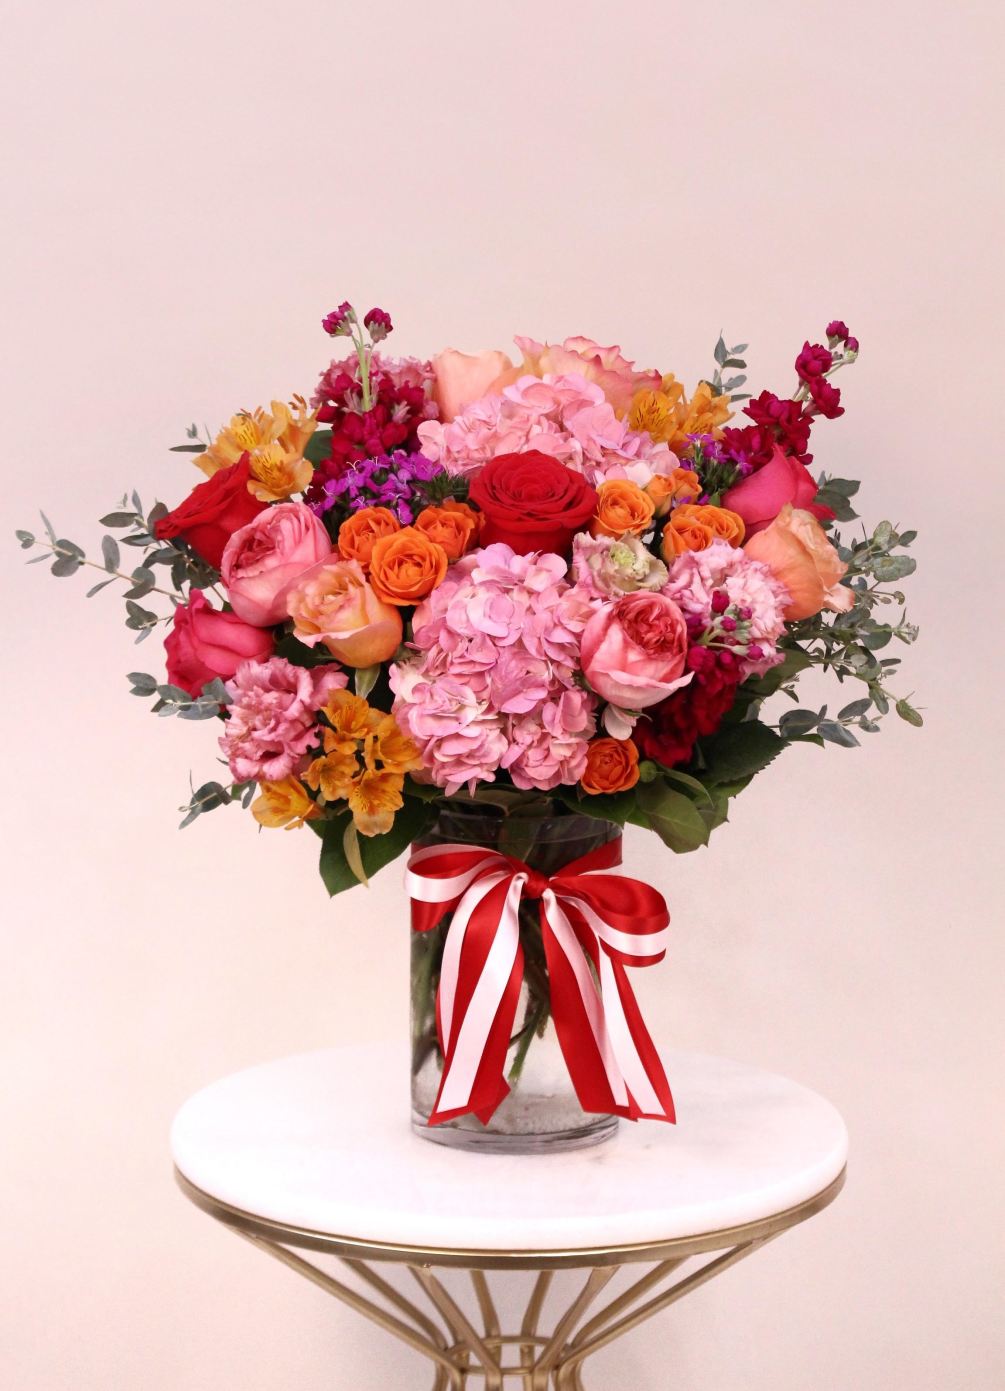 This beautiful arrangement with shades of red, pinks, purple, orange and magenta